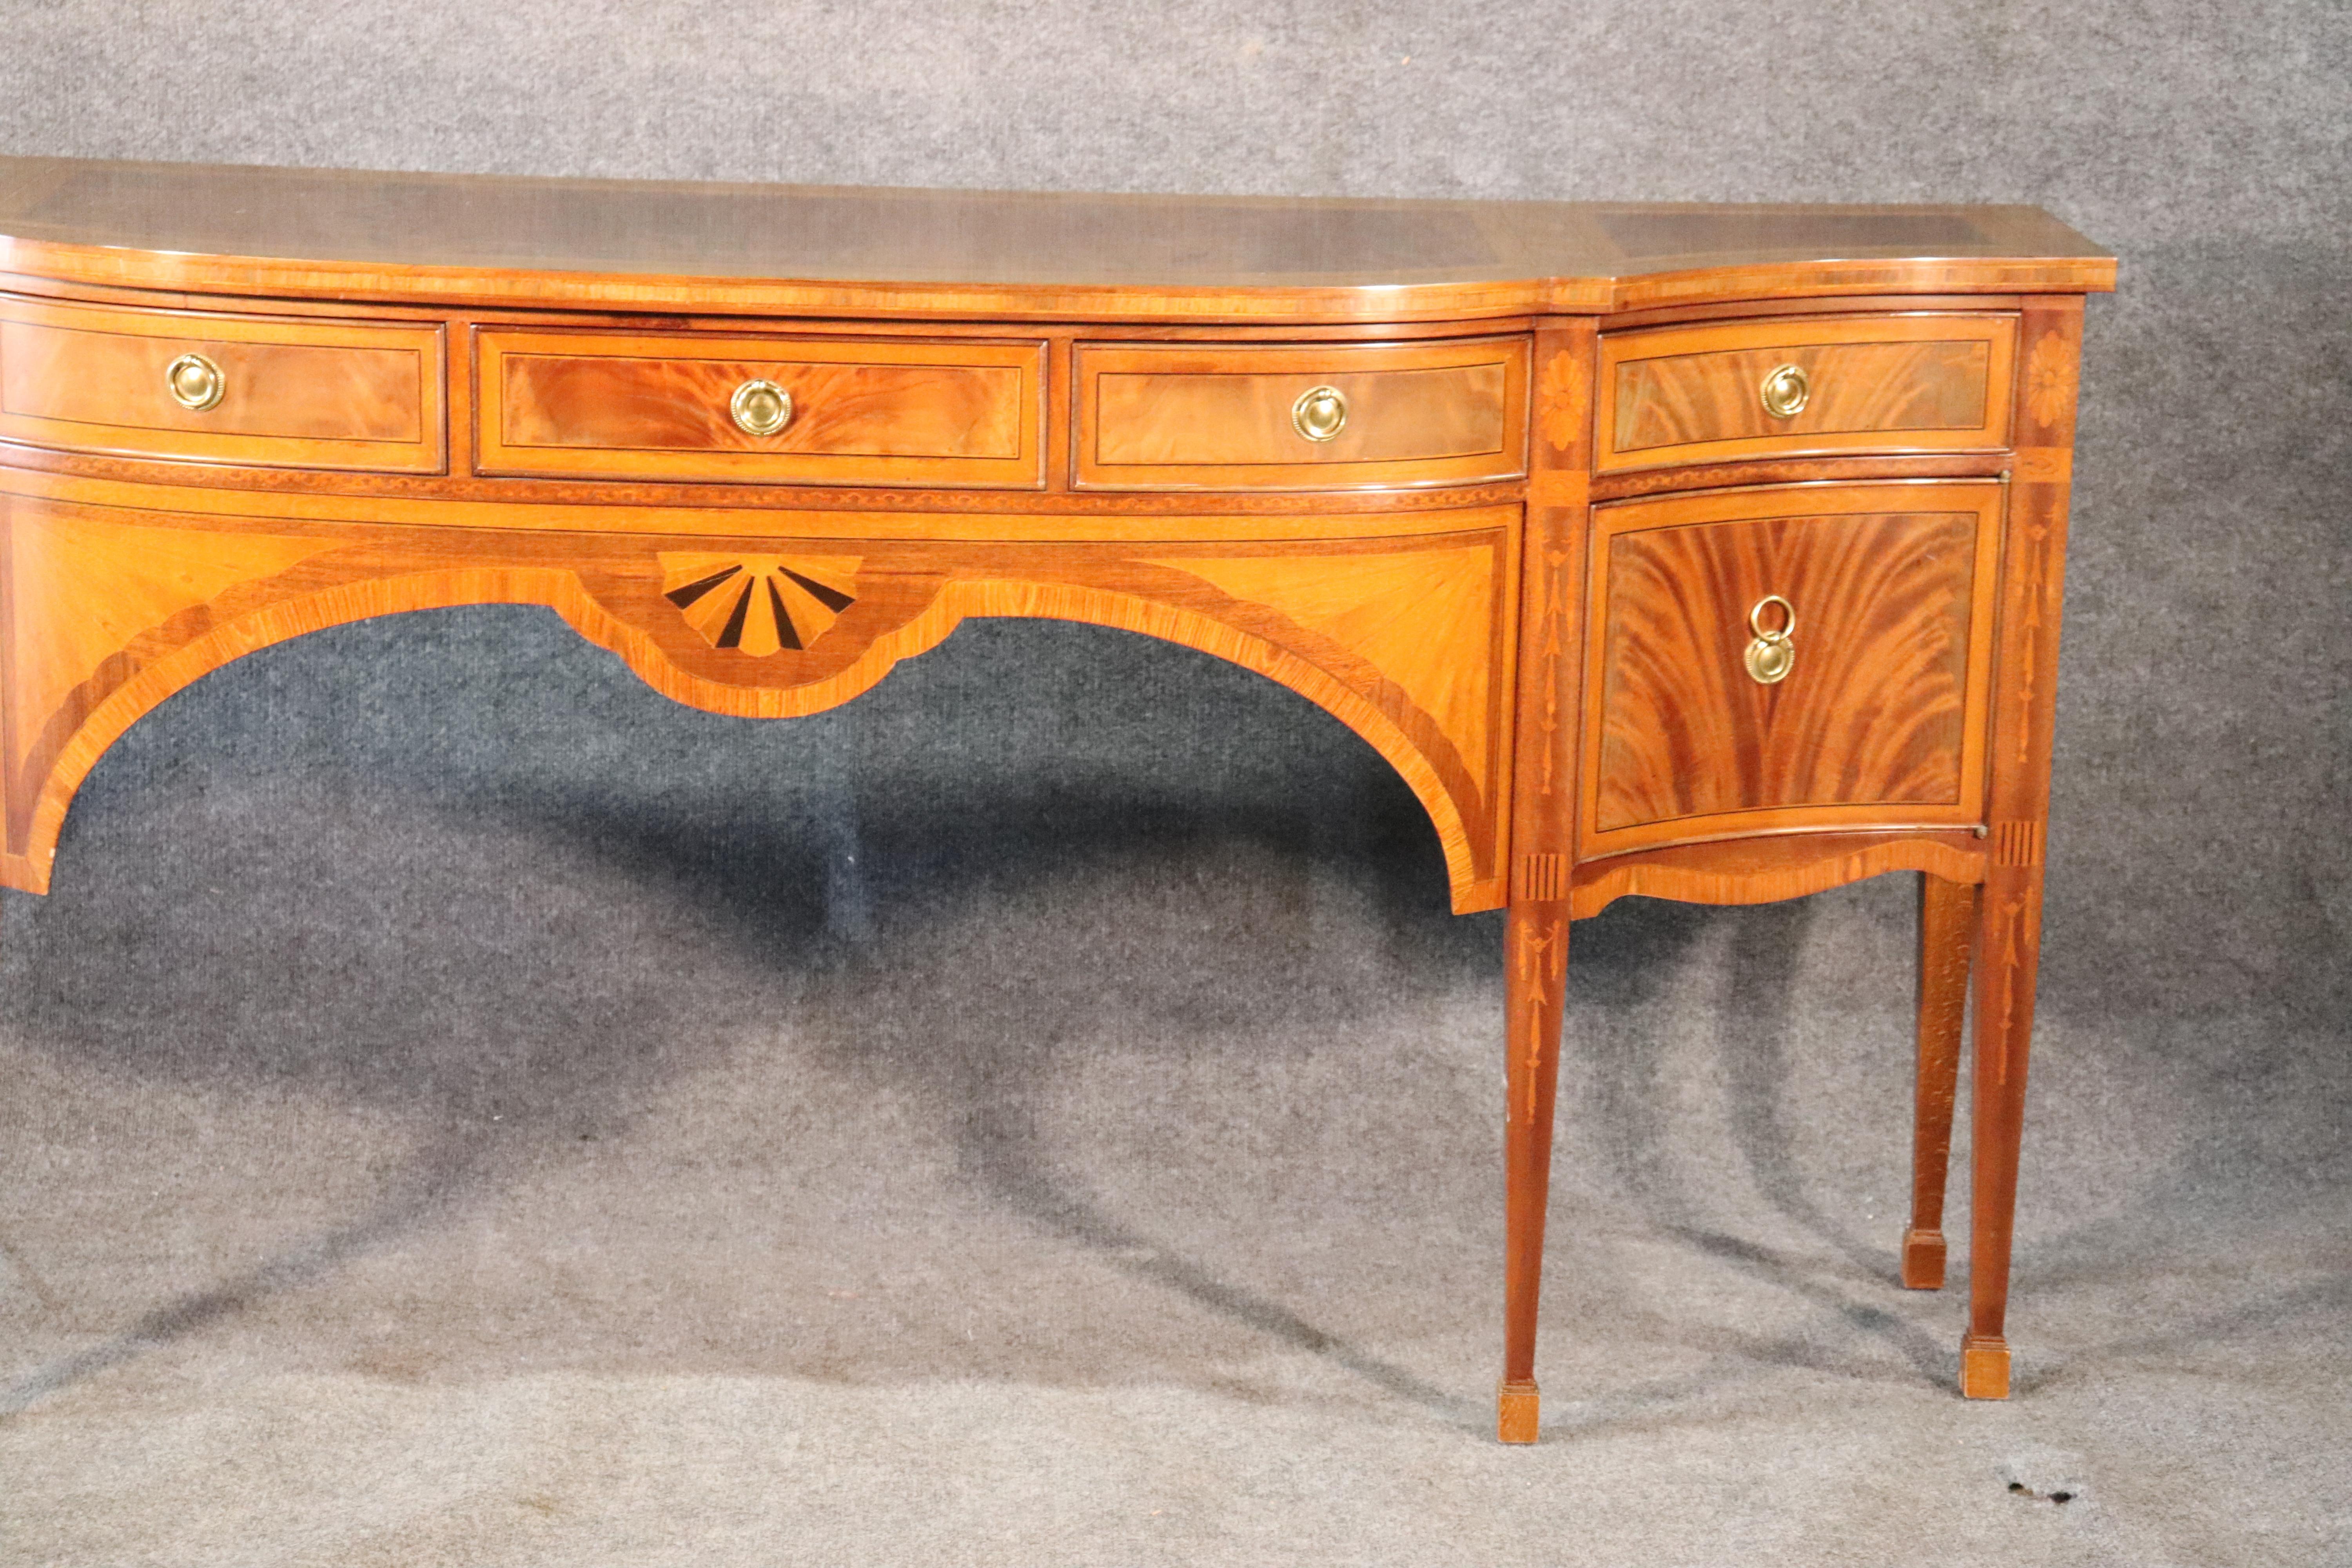 This is a pale and yet beautiful flame mahogany sideboard with great design elements and quality. 
The sideboard measures 78 wide x 21 deep x 36 tall.